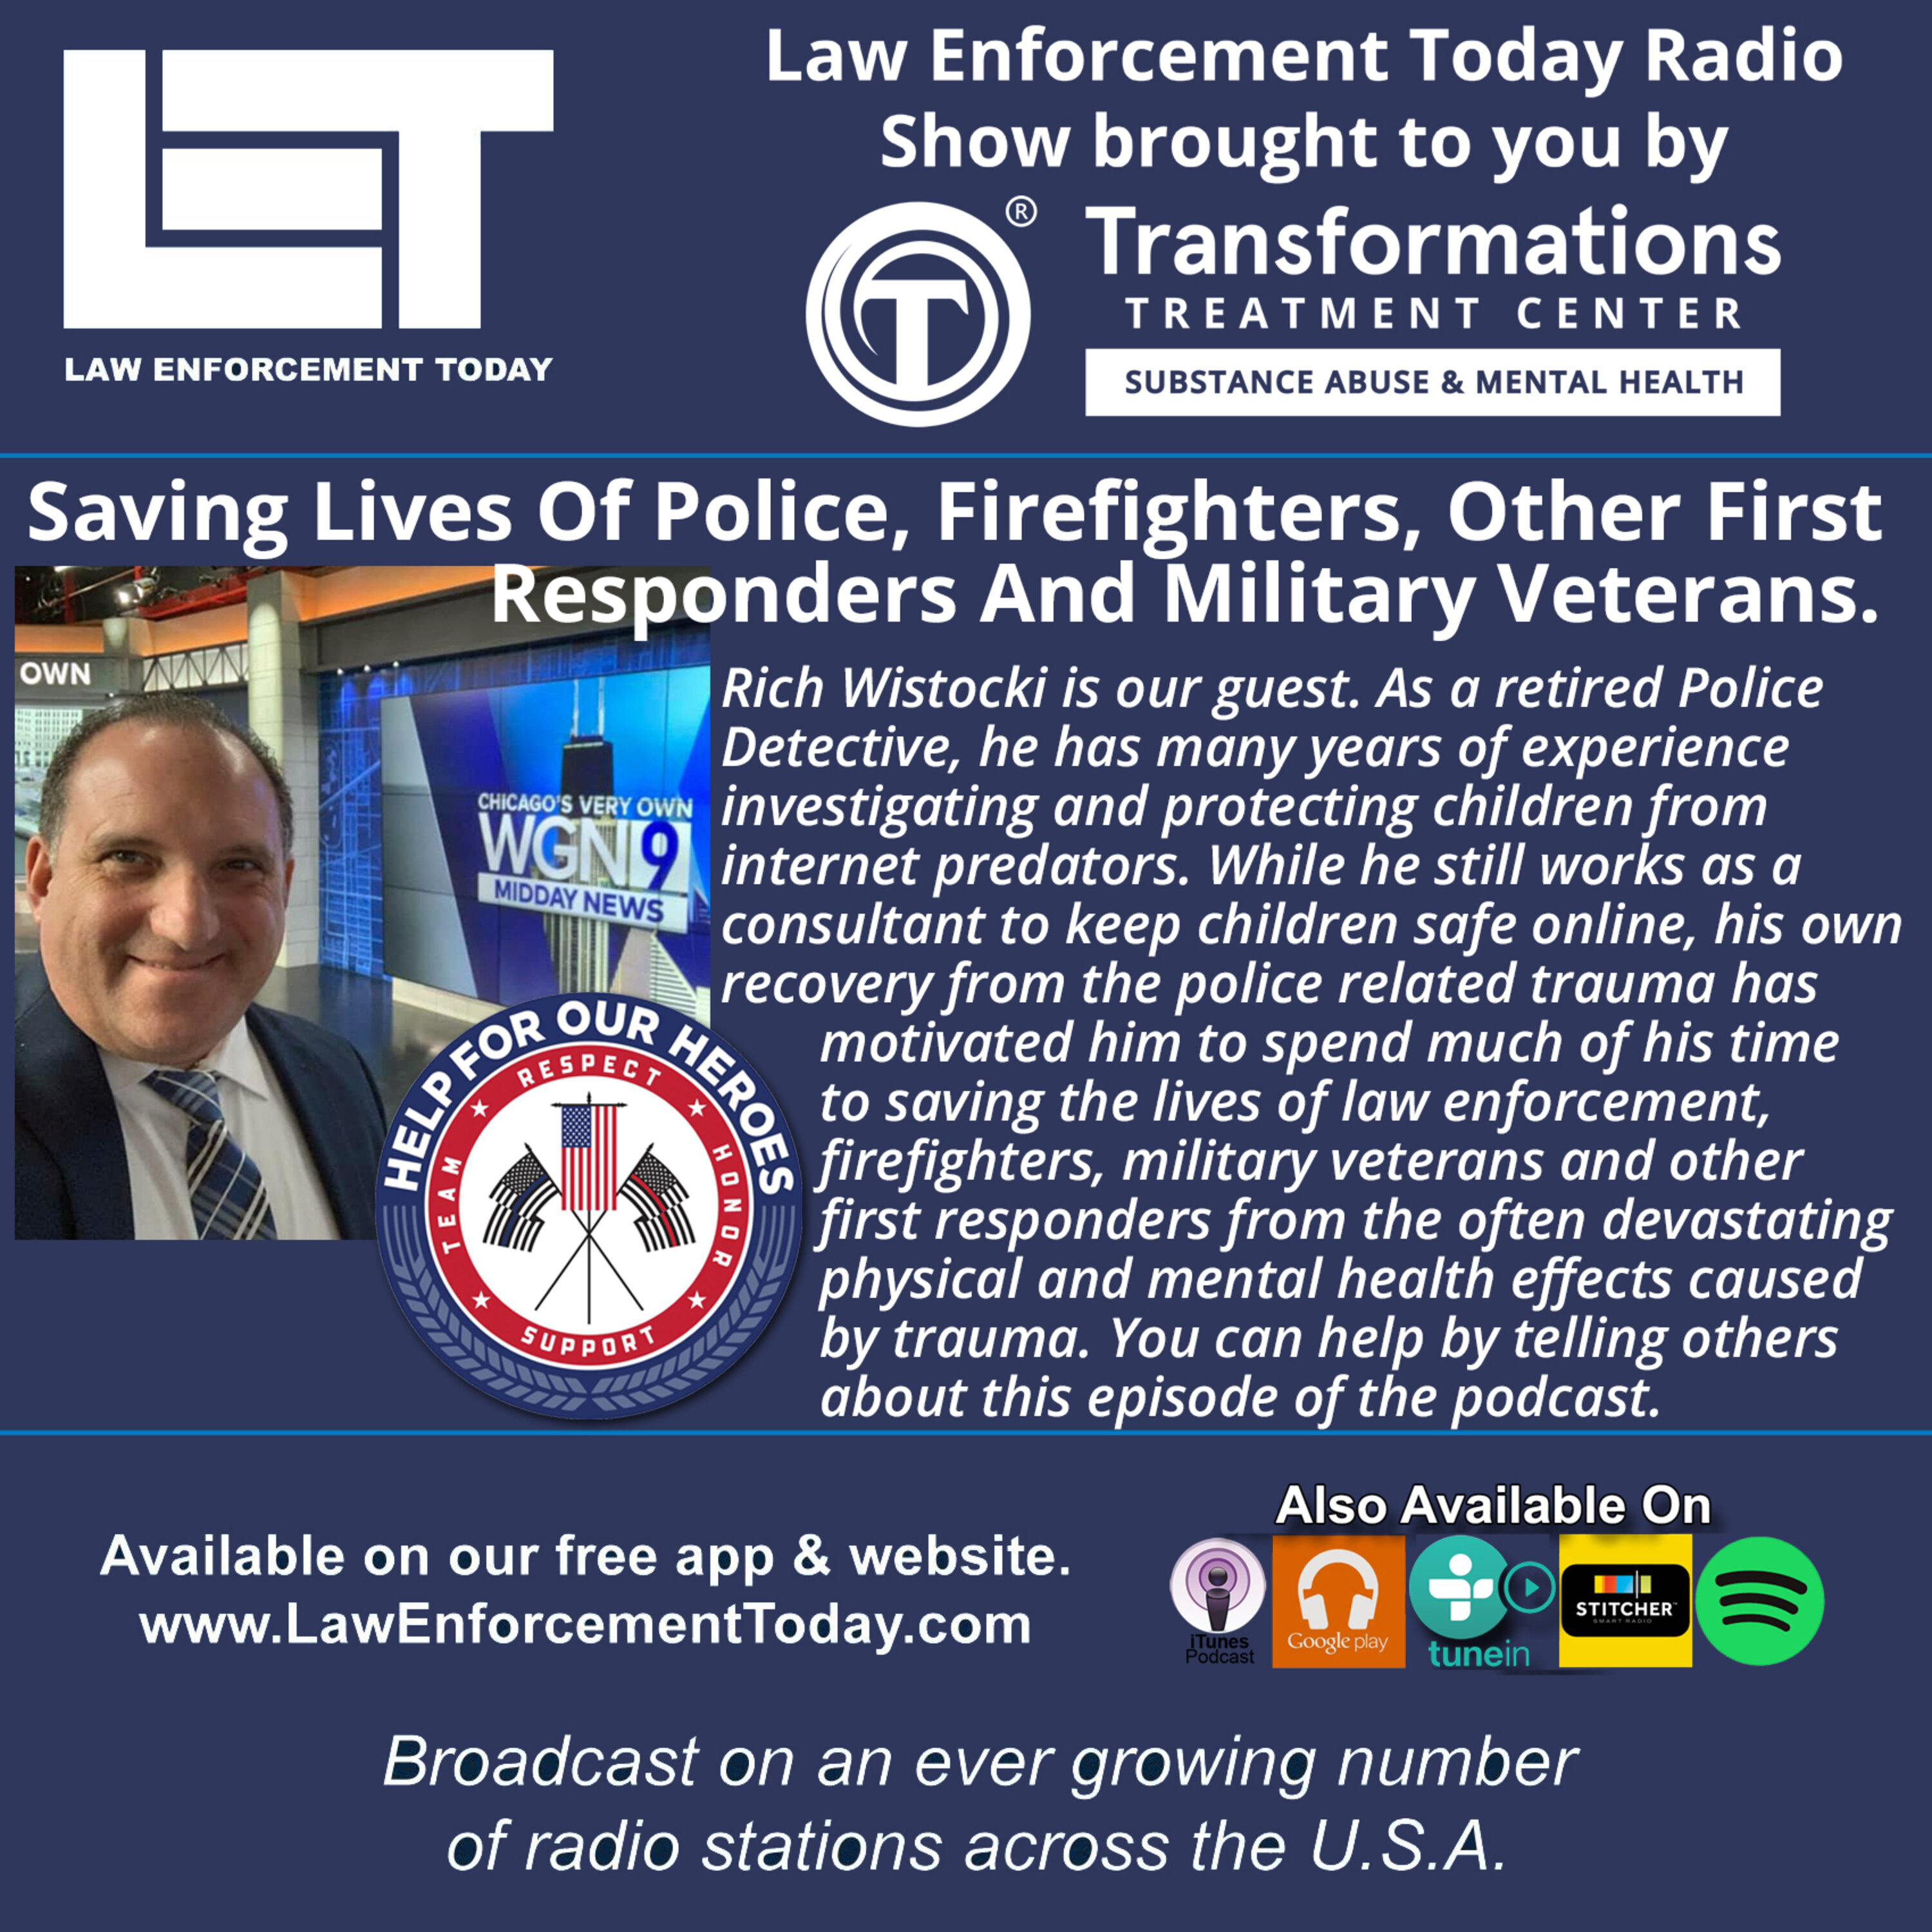 S4E69: Saving Lives Of Police, Firefighters, Other First Responders And Military Veterans.